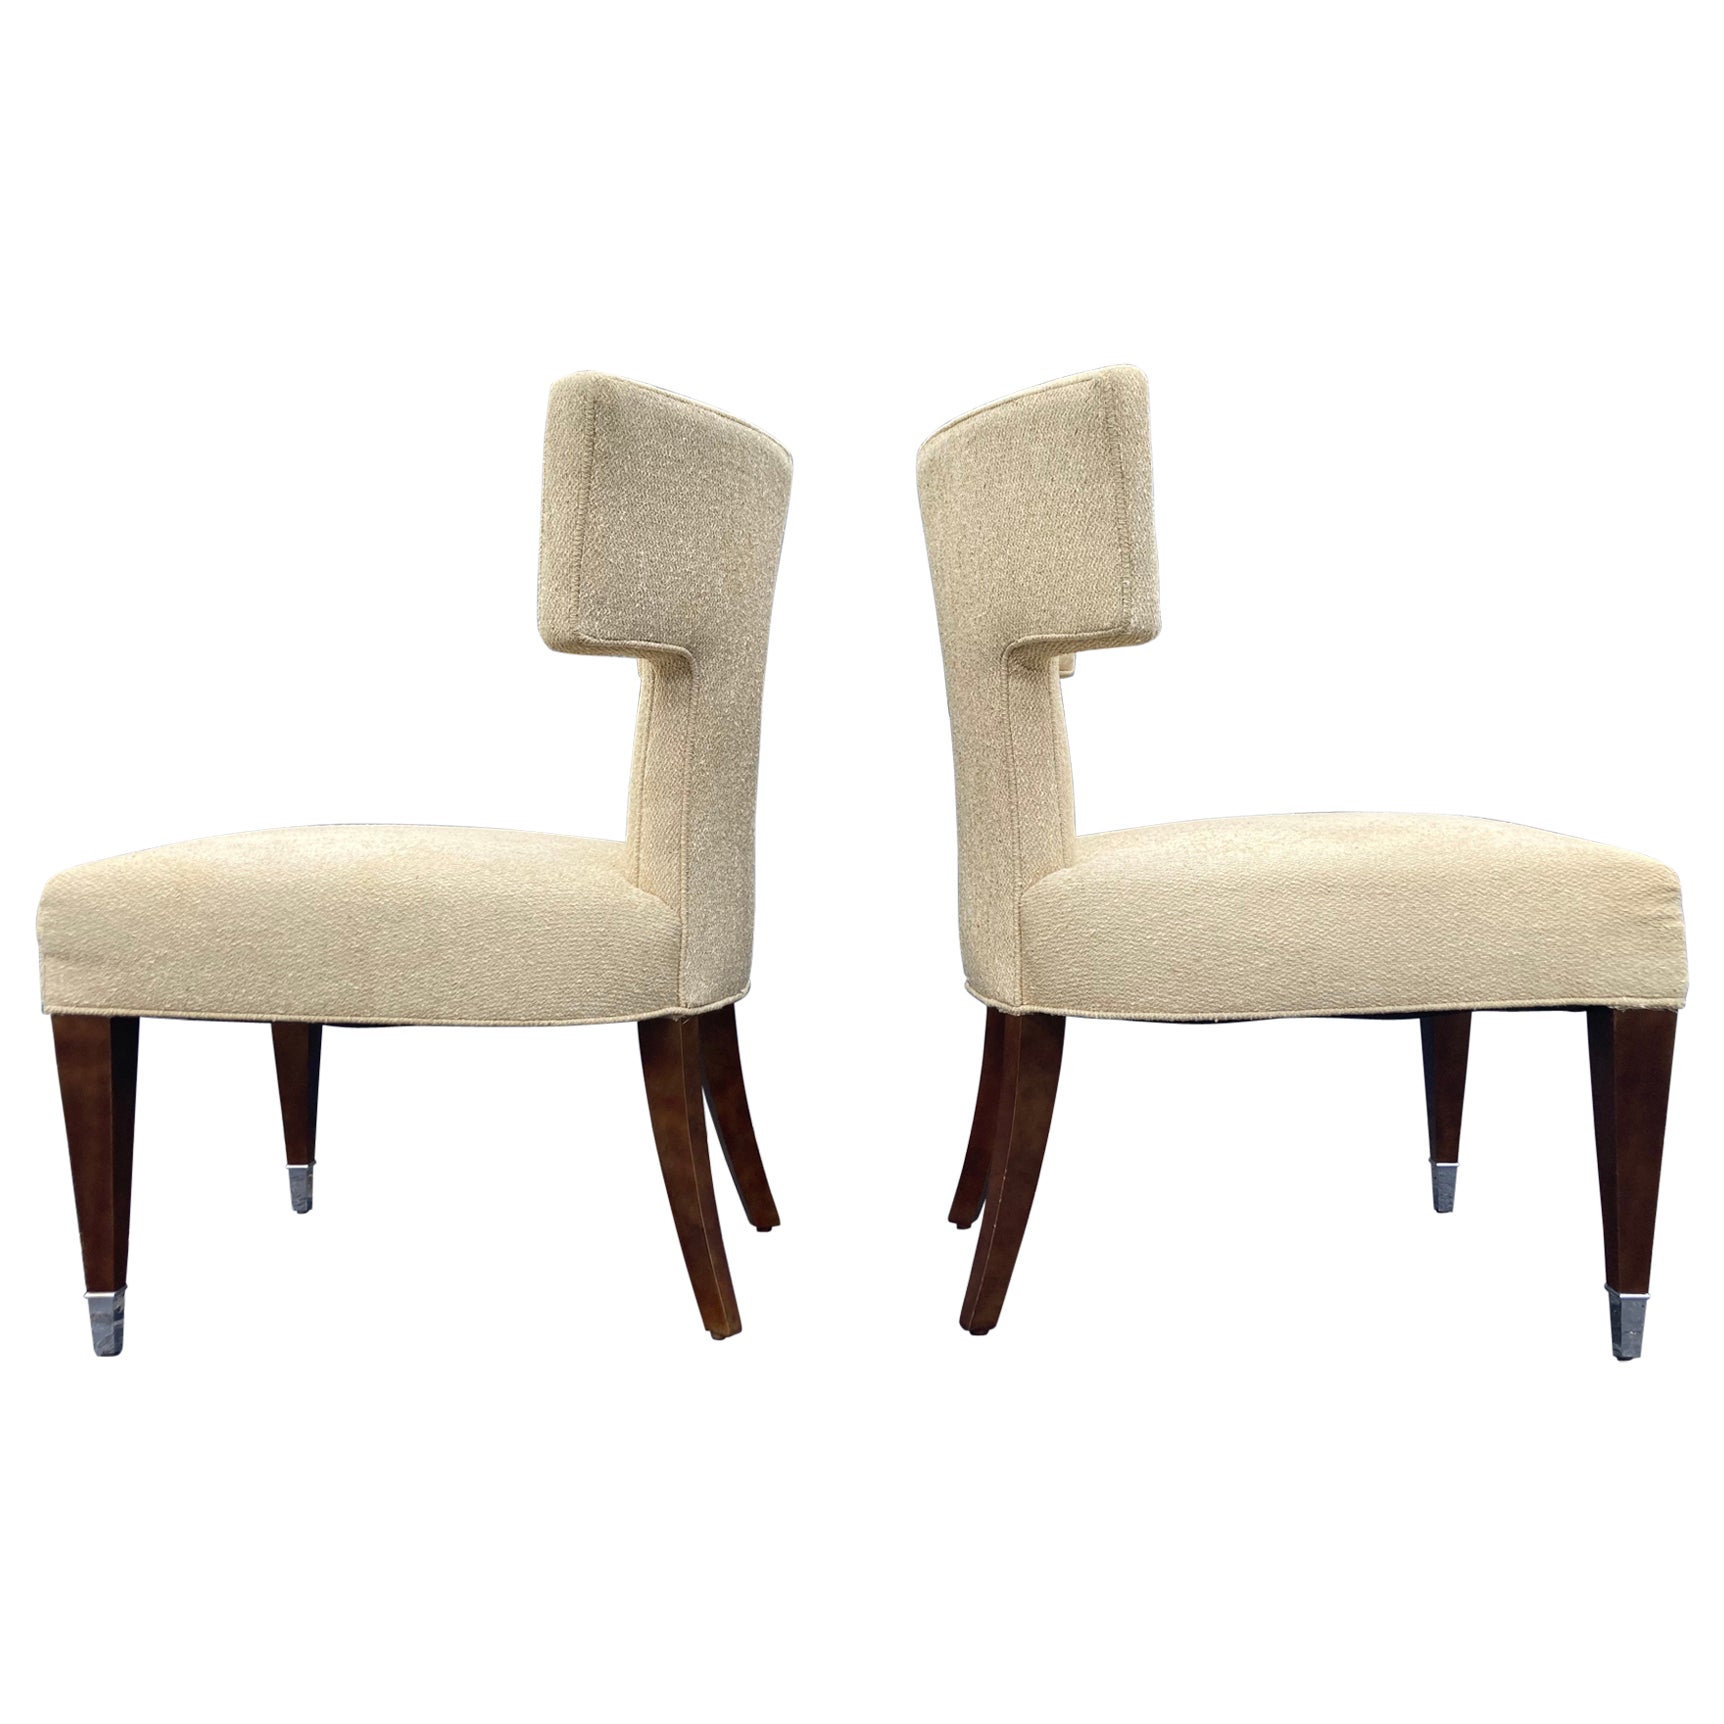 Pair of Chairs Designed by Larry Laslo for Directional 